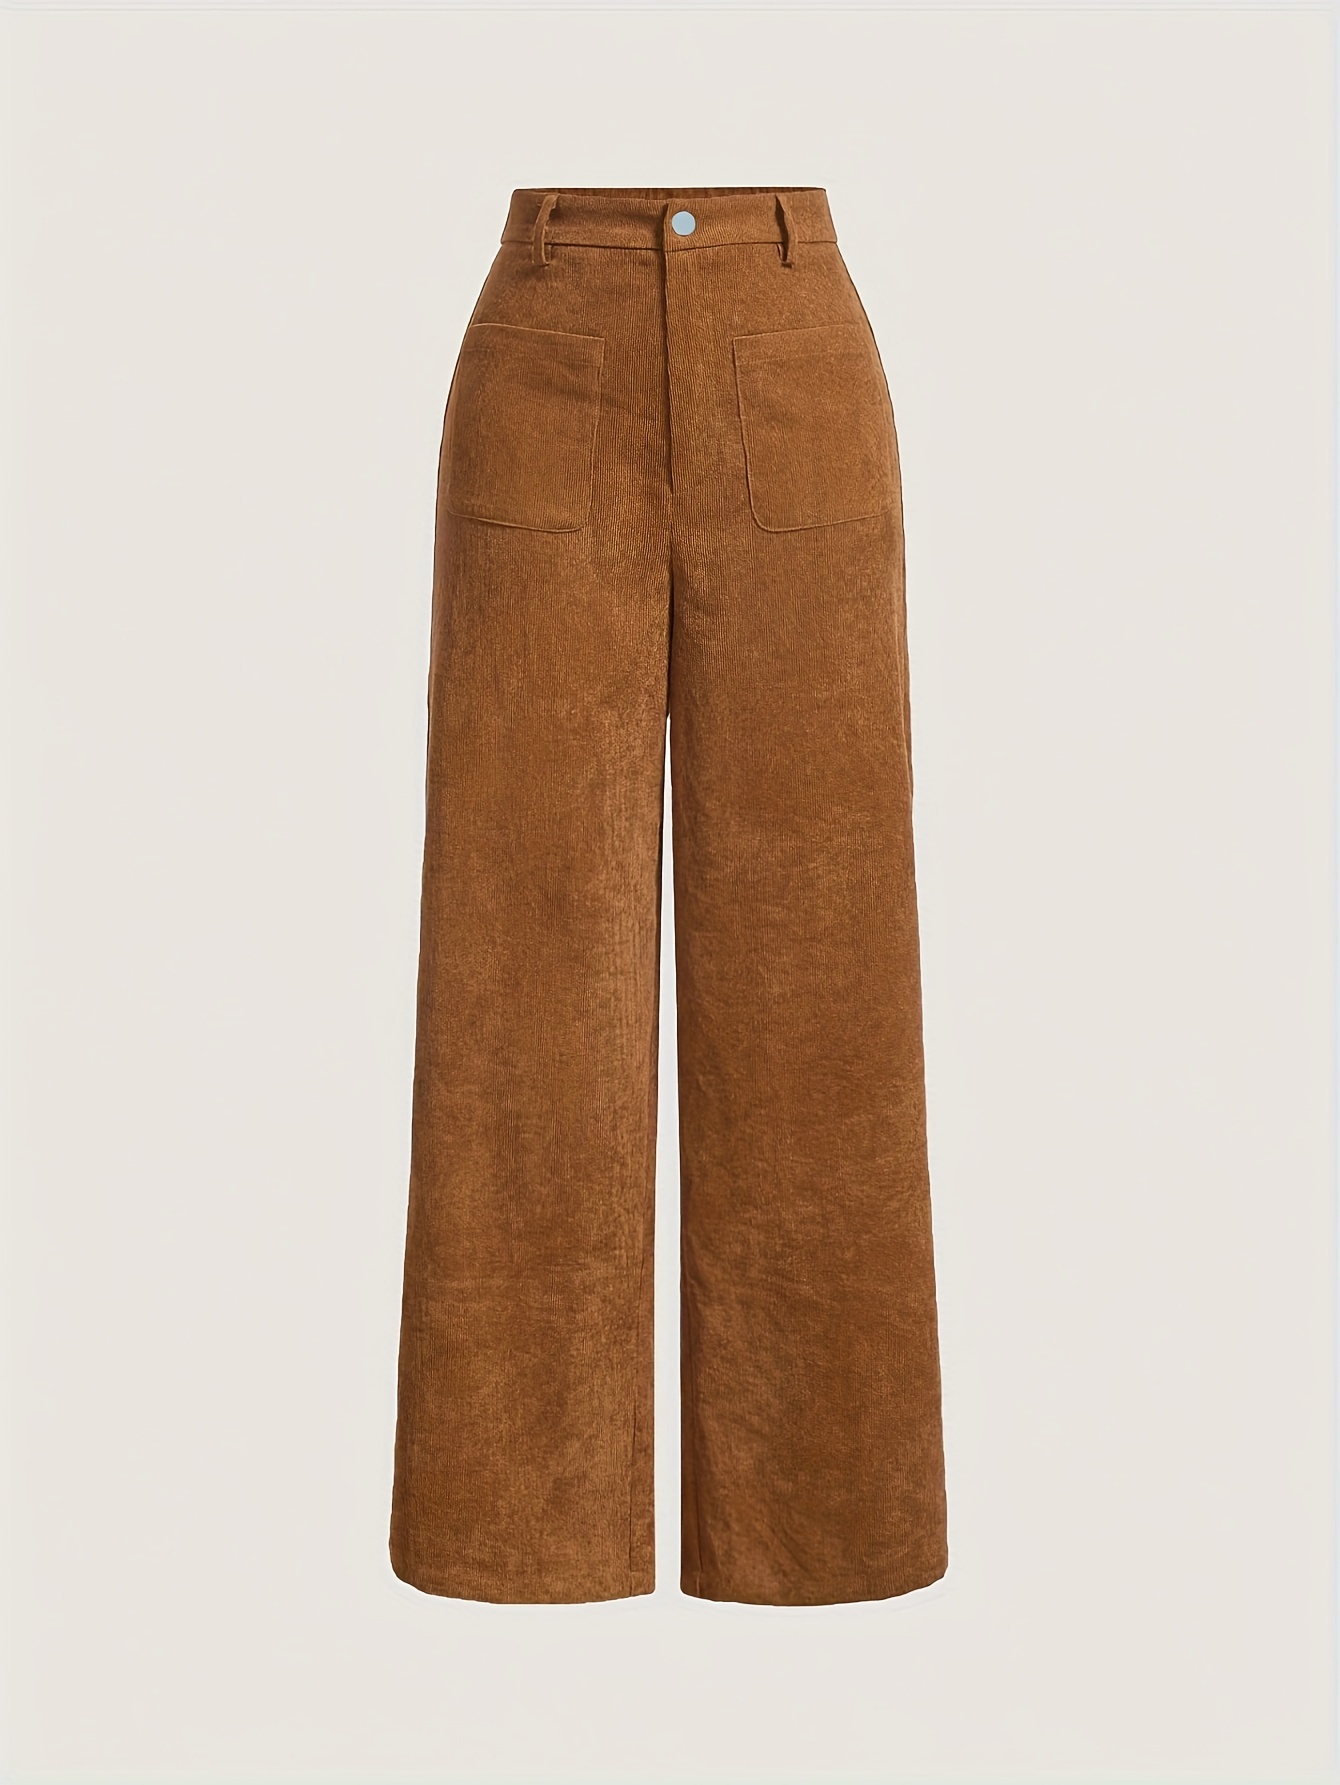 solid corduroy straight leg pants vintage patched pocket loose pants womens clothing details 31